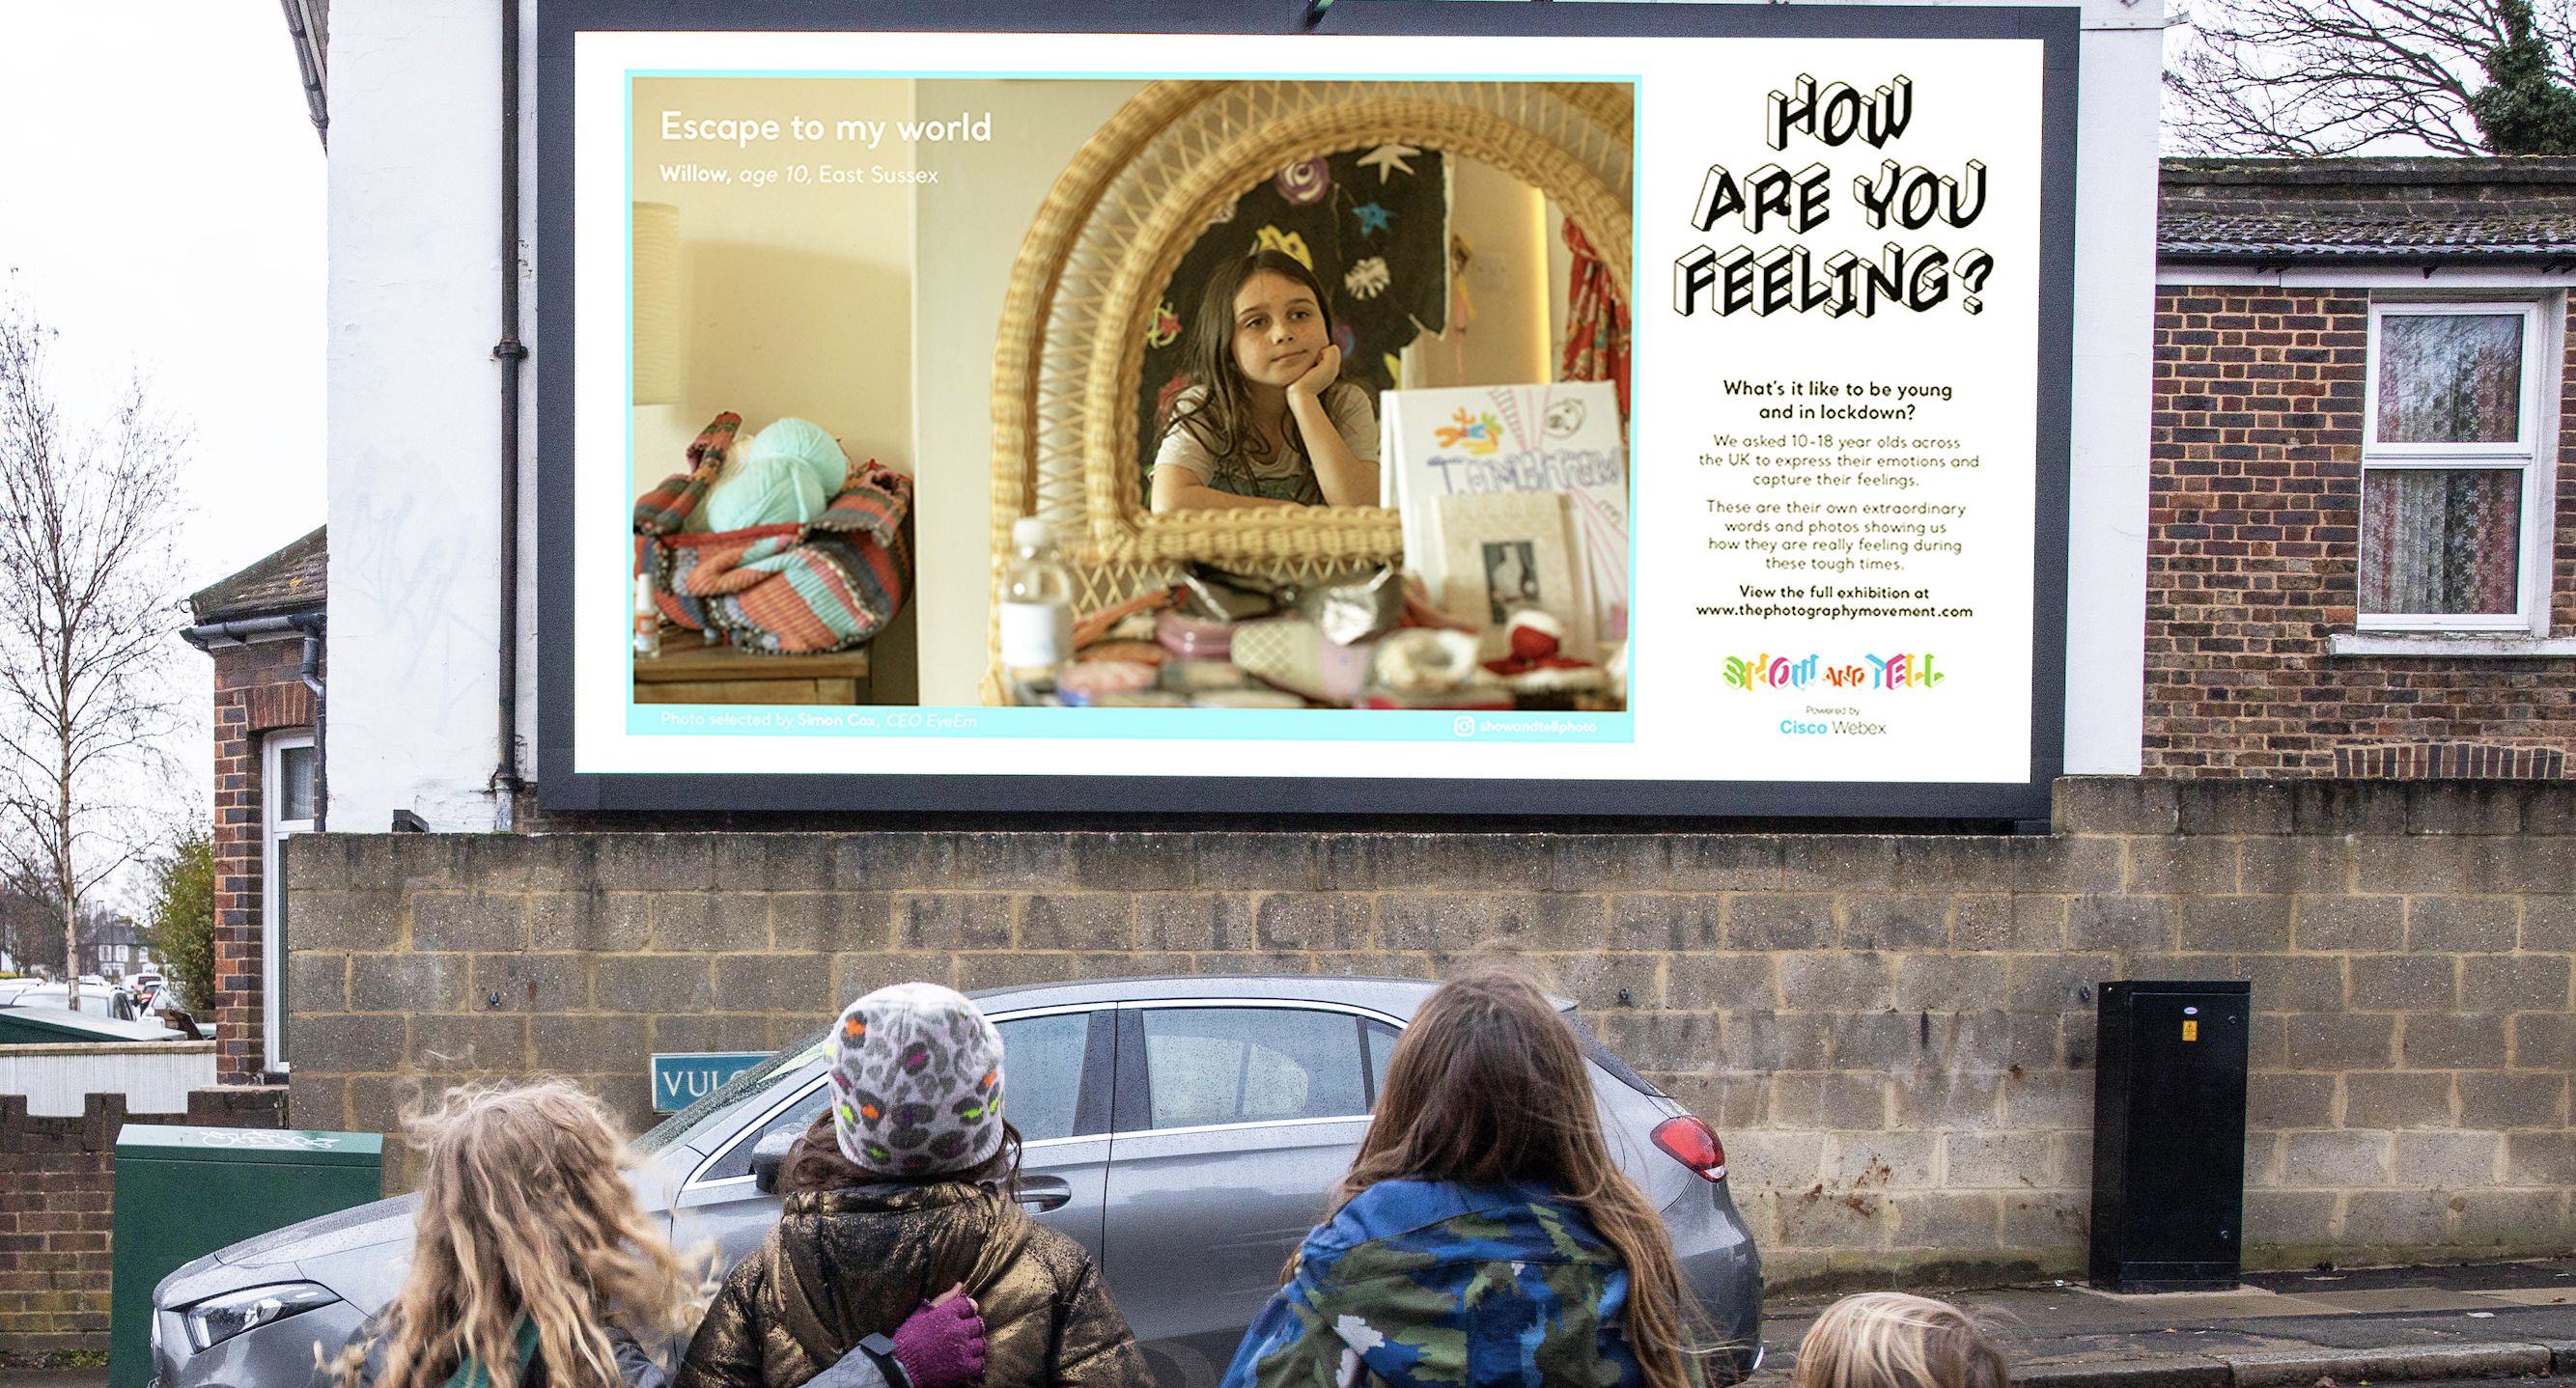 Show and Tell Photo and the ‘How are you Feeling?’ campaign